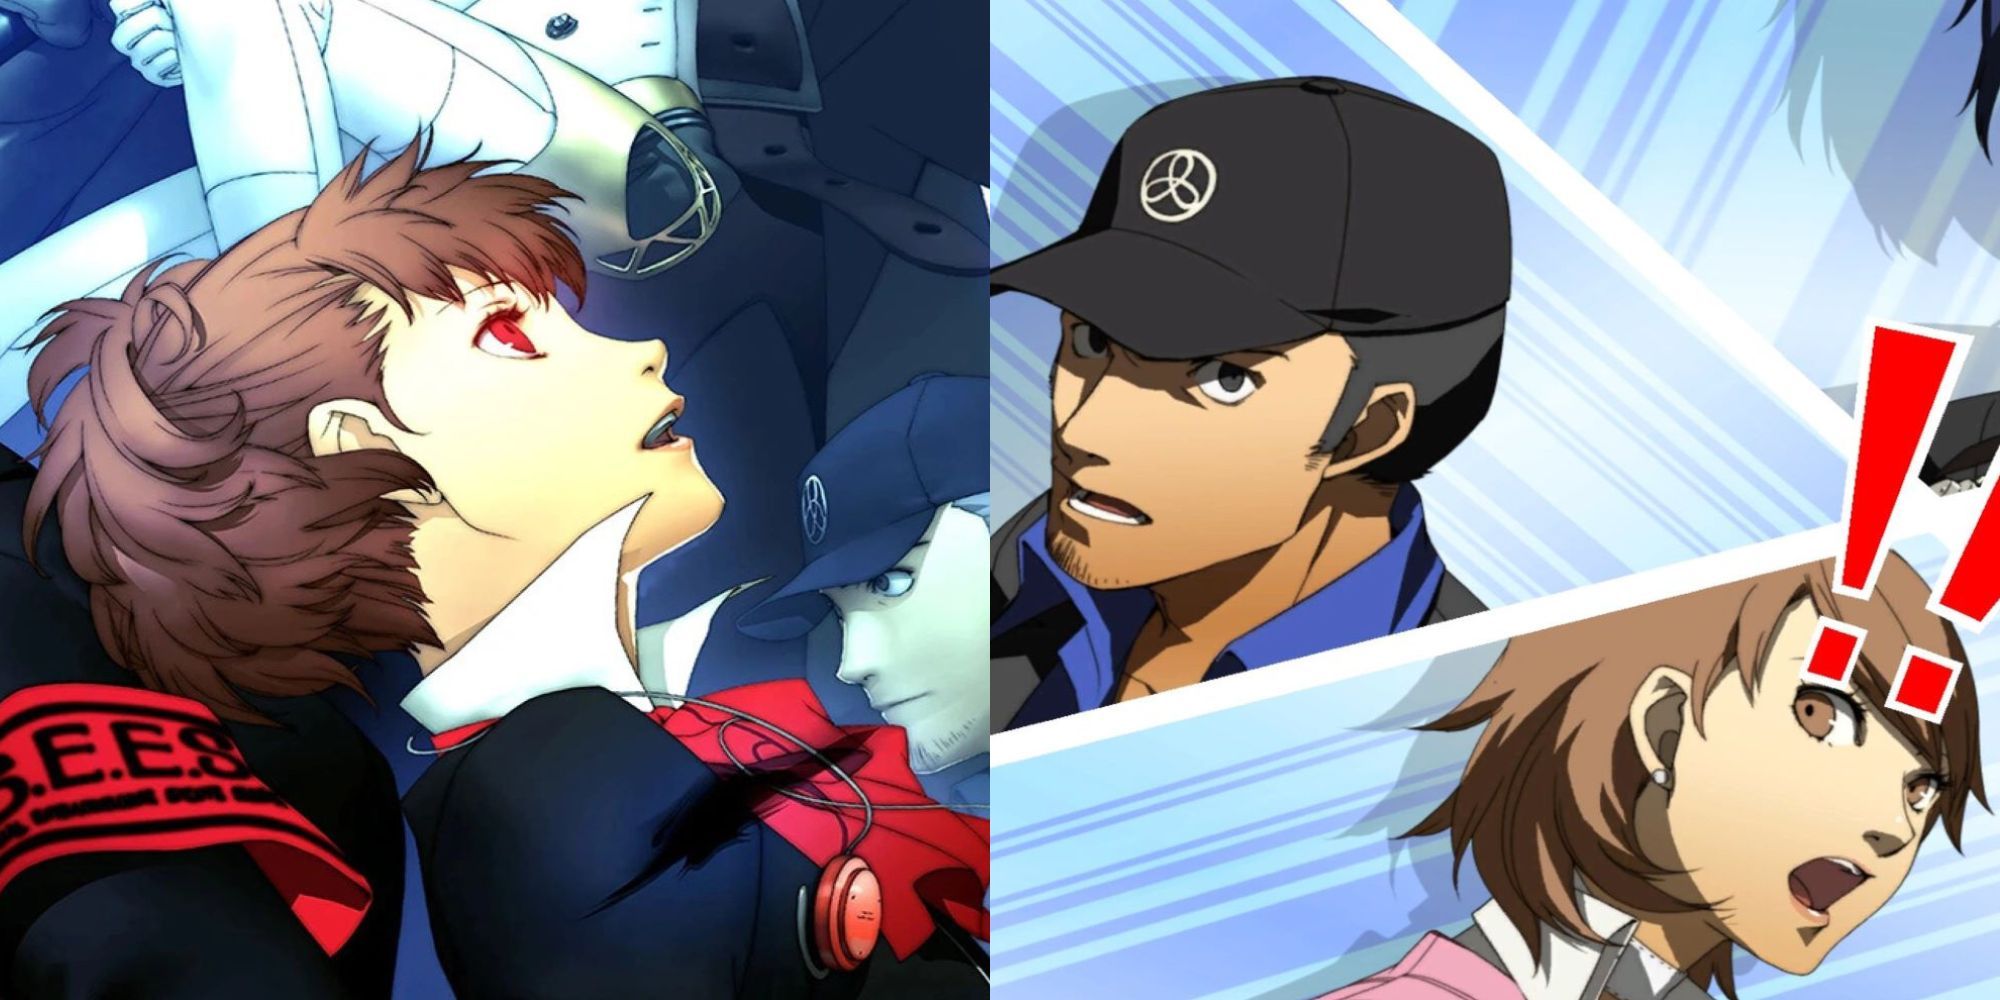 Small Details in Persona 3 Portable We Love Featuring the Main Character, Junpei, and Yukari